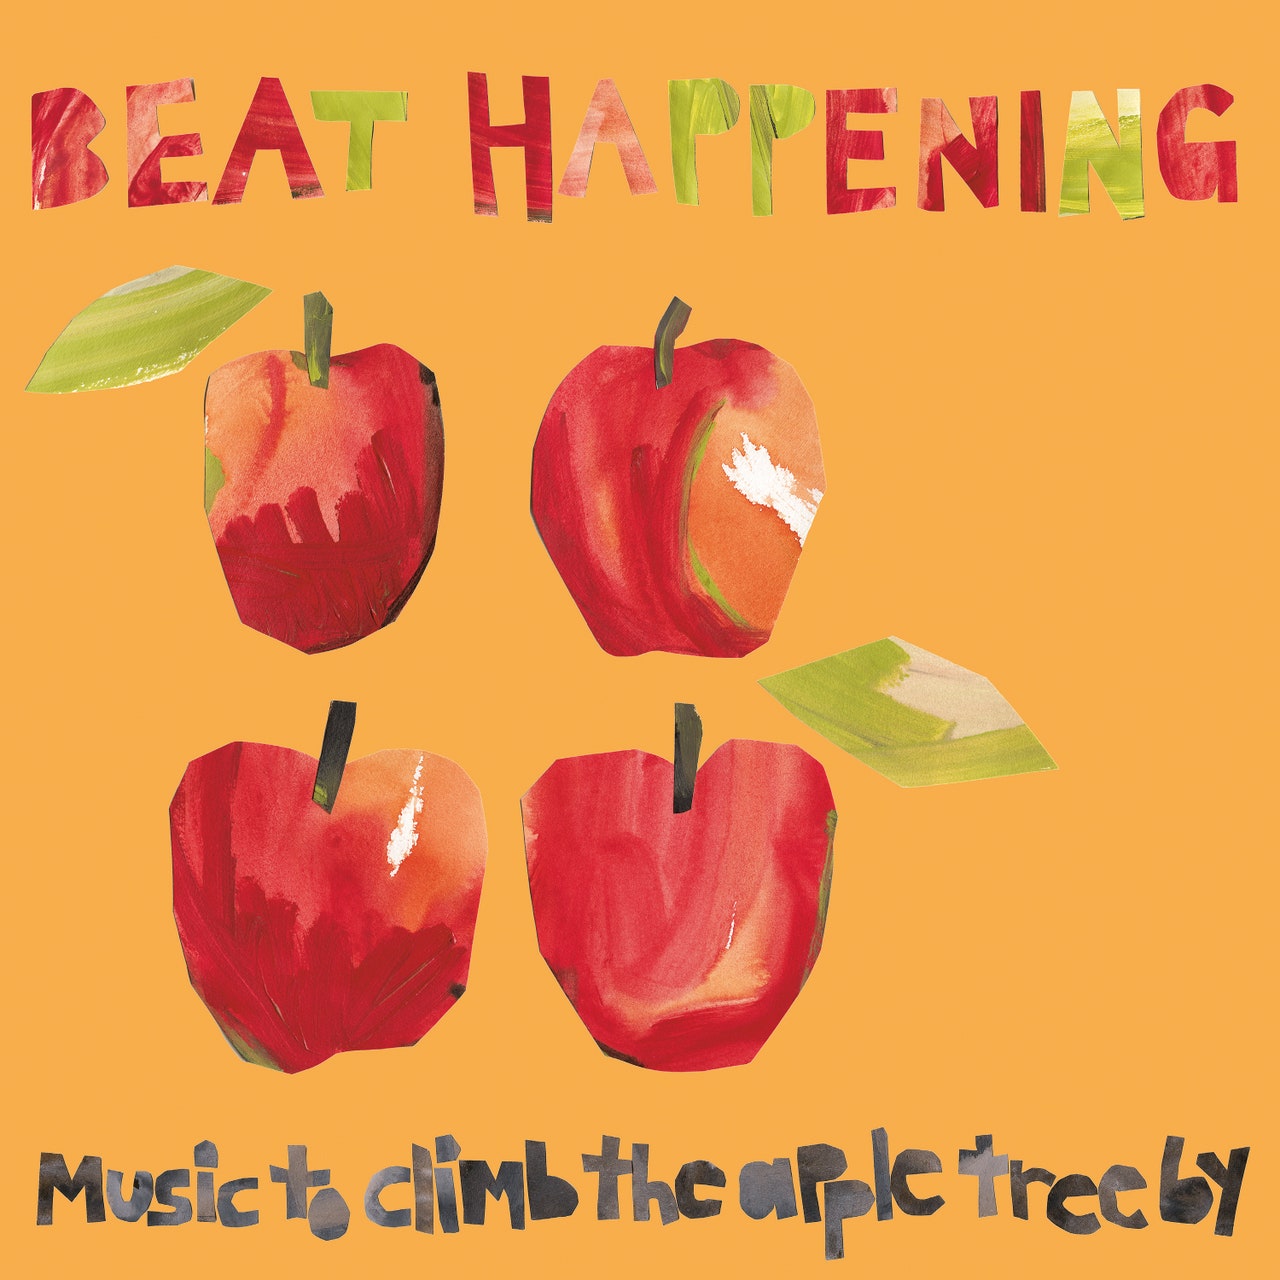 Beat Happening: Music to Climb the Apple Tree By